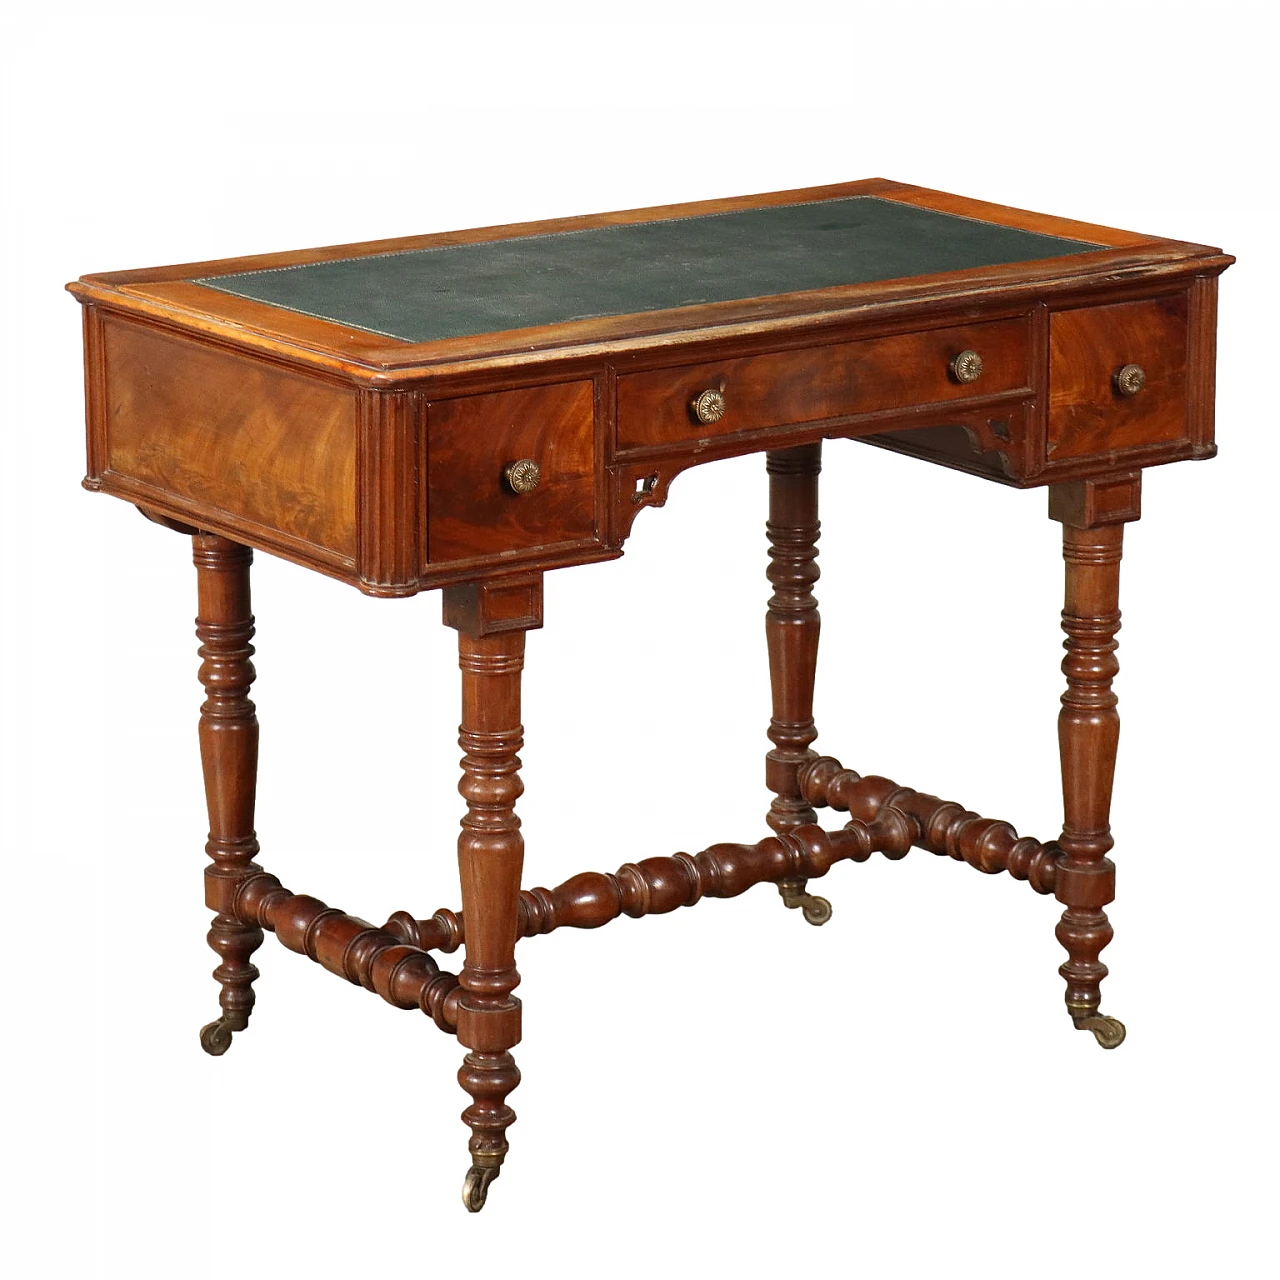 Early Victorian mahogany feather panelled writing desk, mid-19th century 1